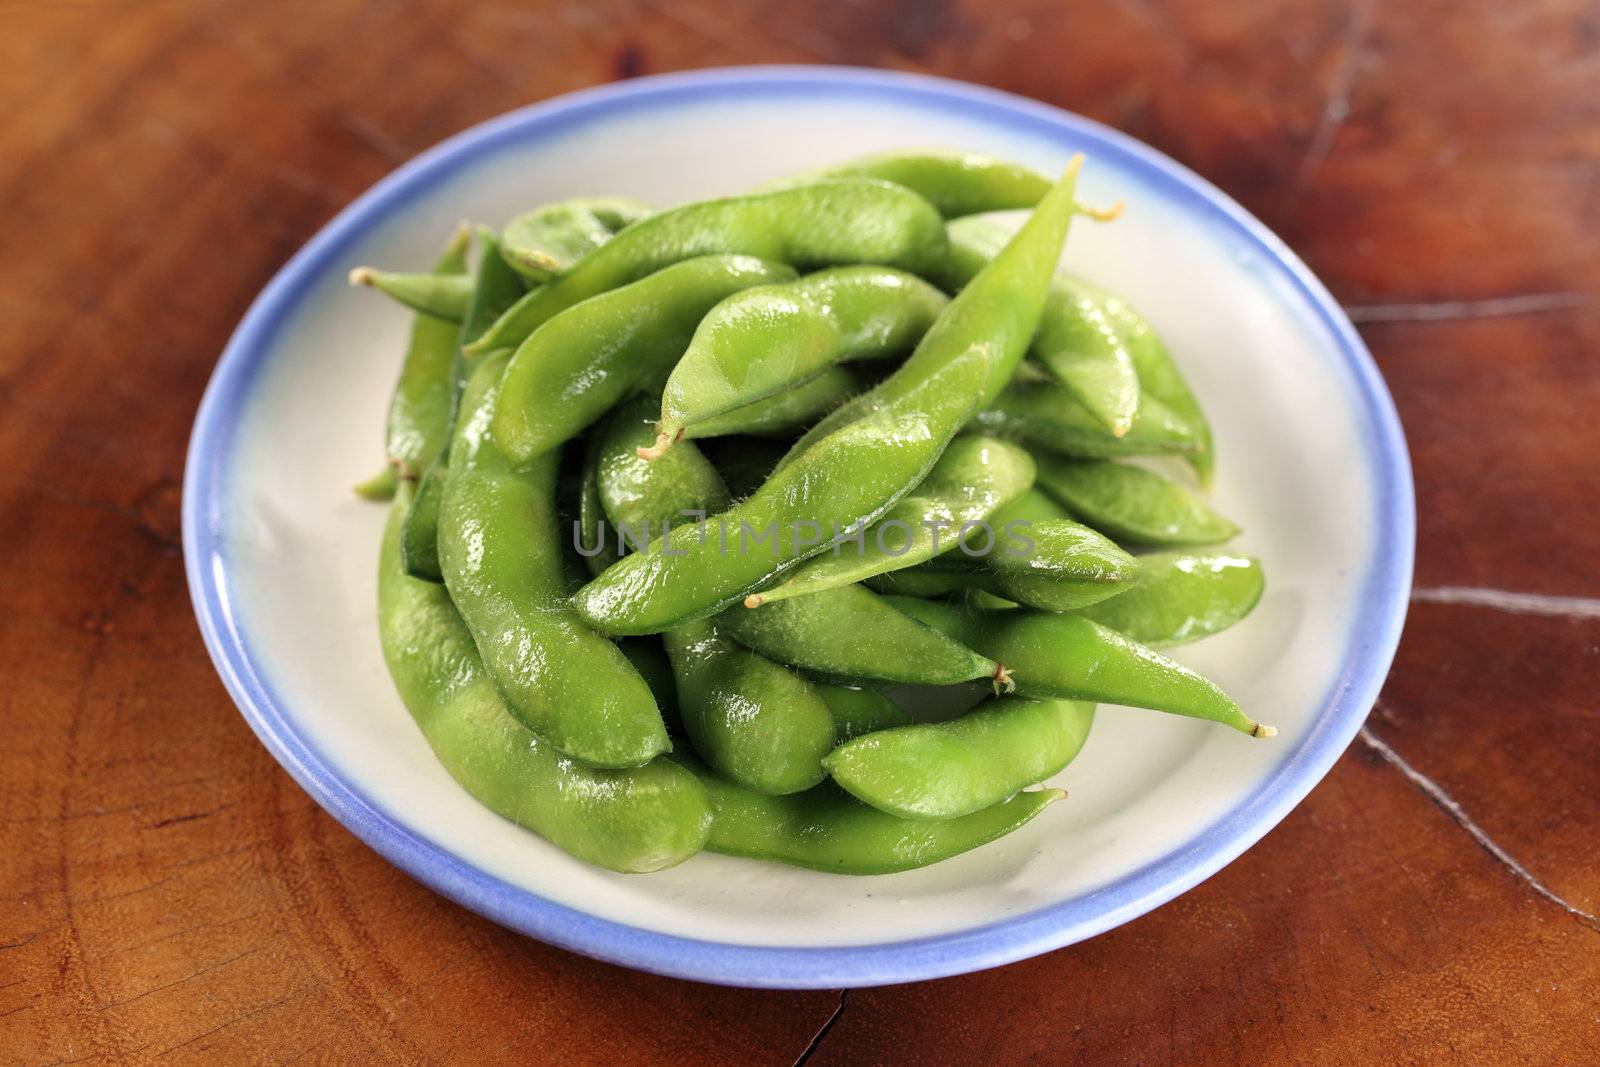 plate of boiled edamame or soybeans